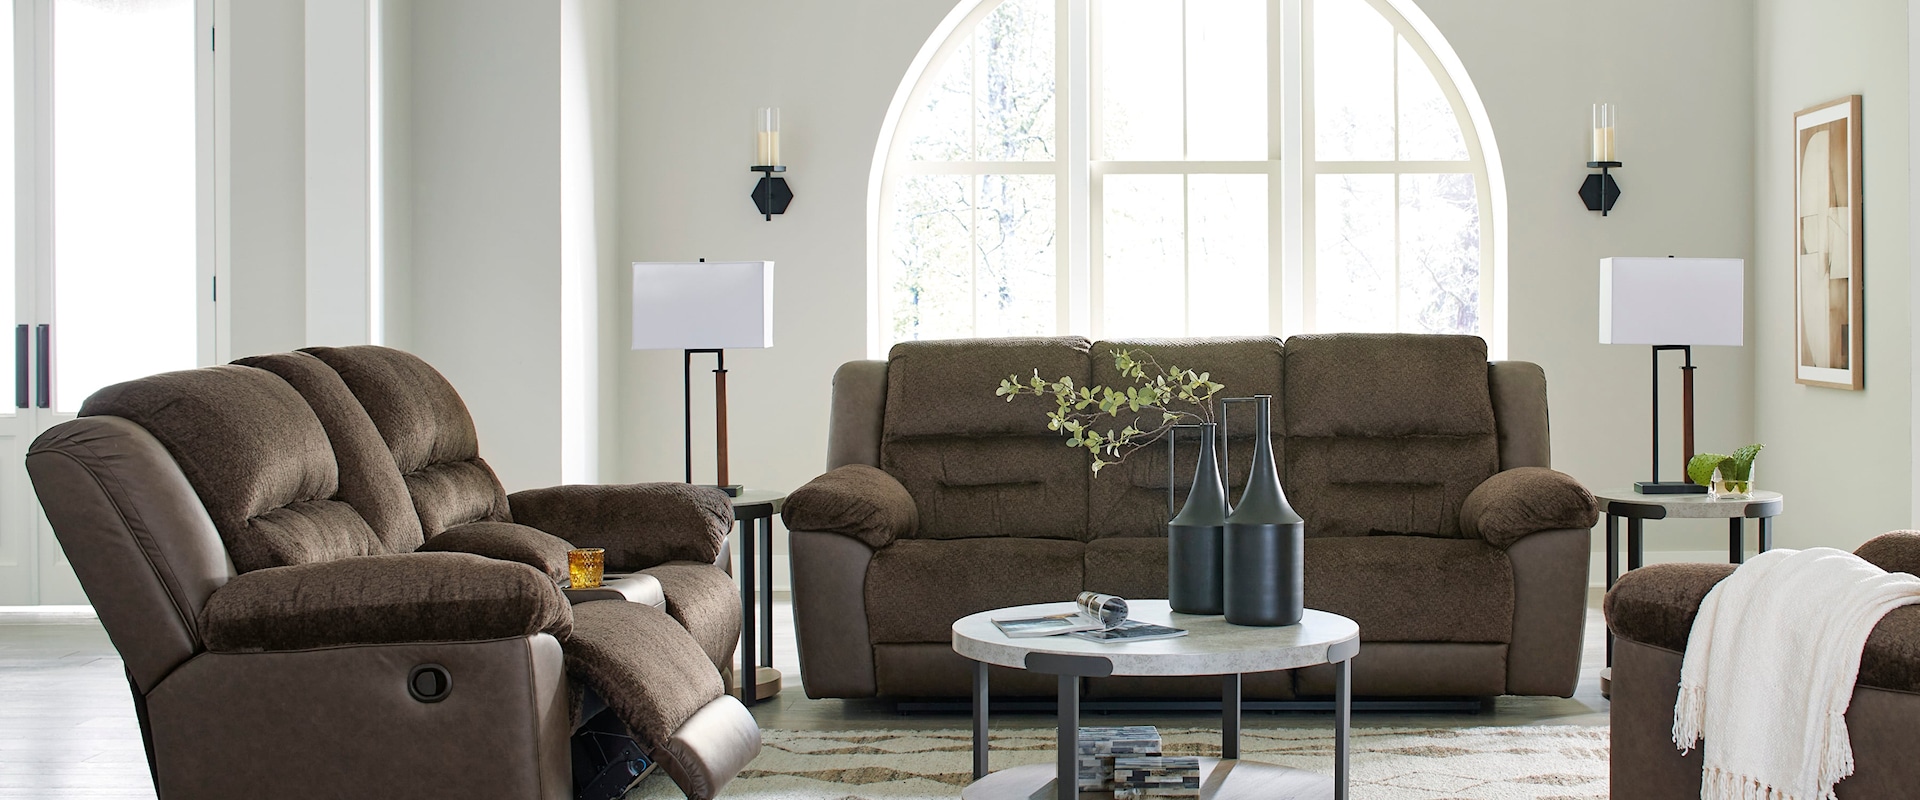 Reclining Sofa, Loveseat And Recliner